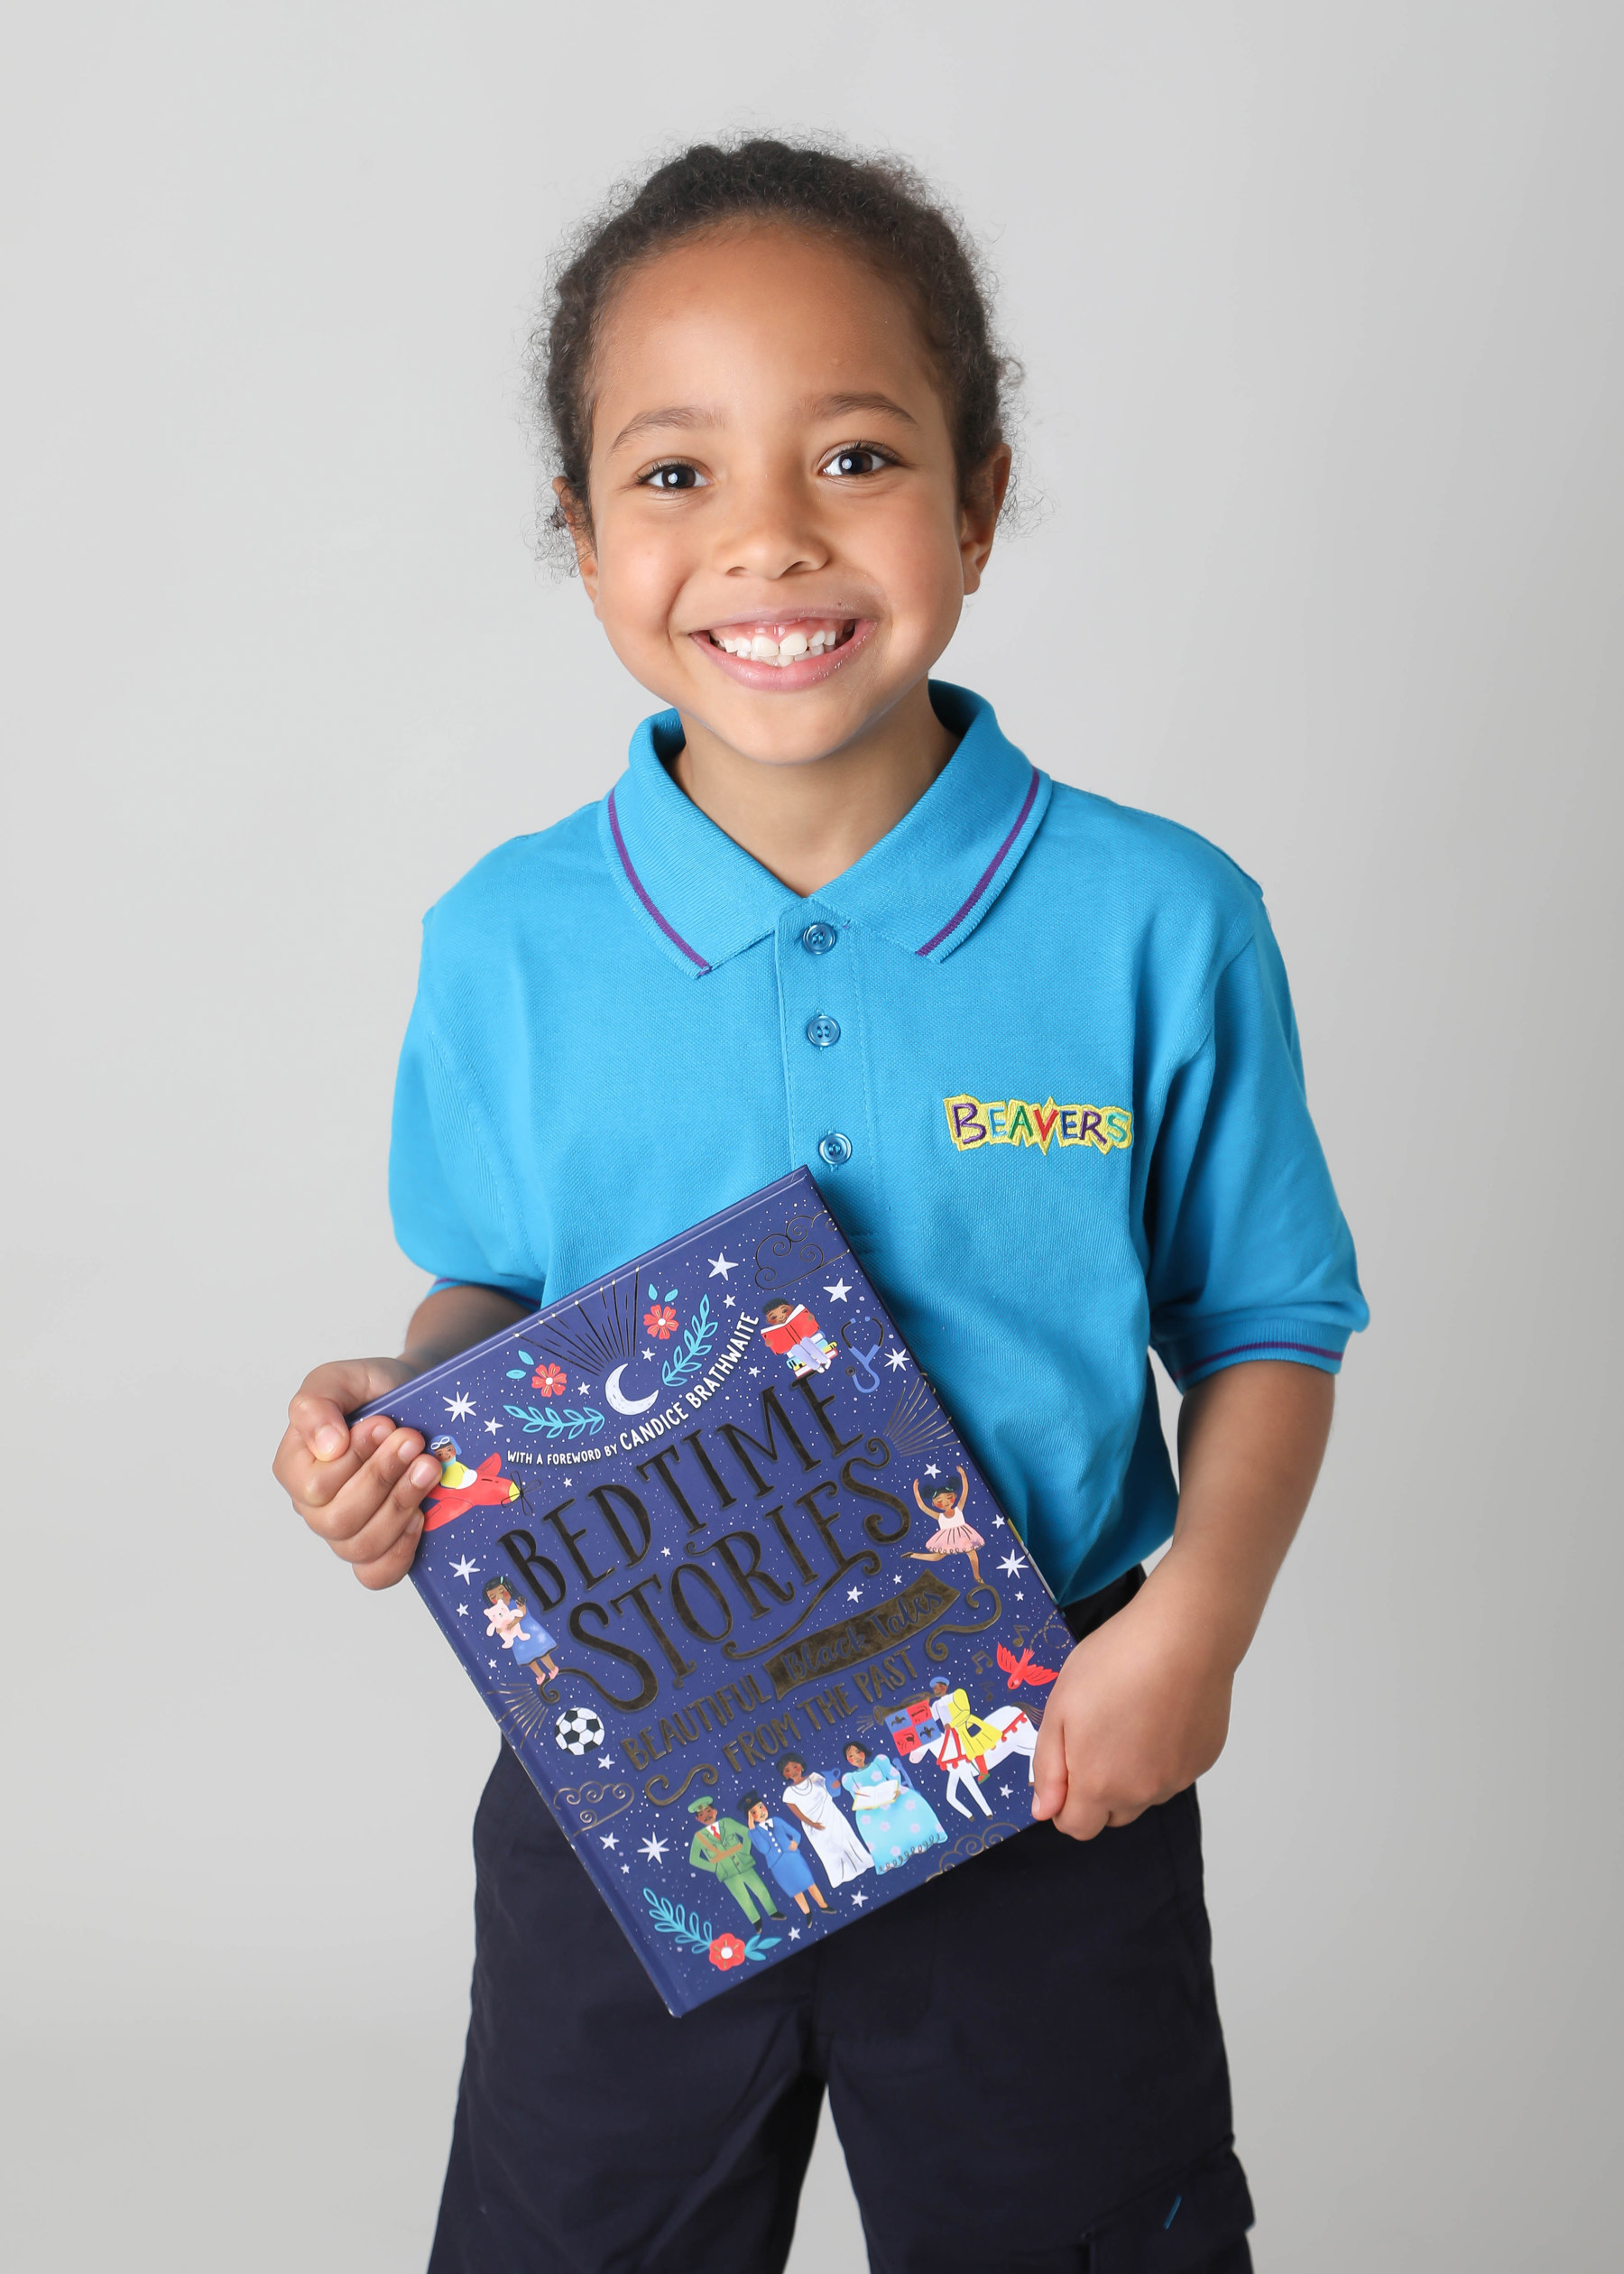 Sarah Mirkin smiling at the camera while wearing a blue Beavers polo shirt and holding a book titled 'Bedtime Stories'